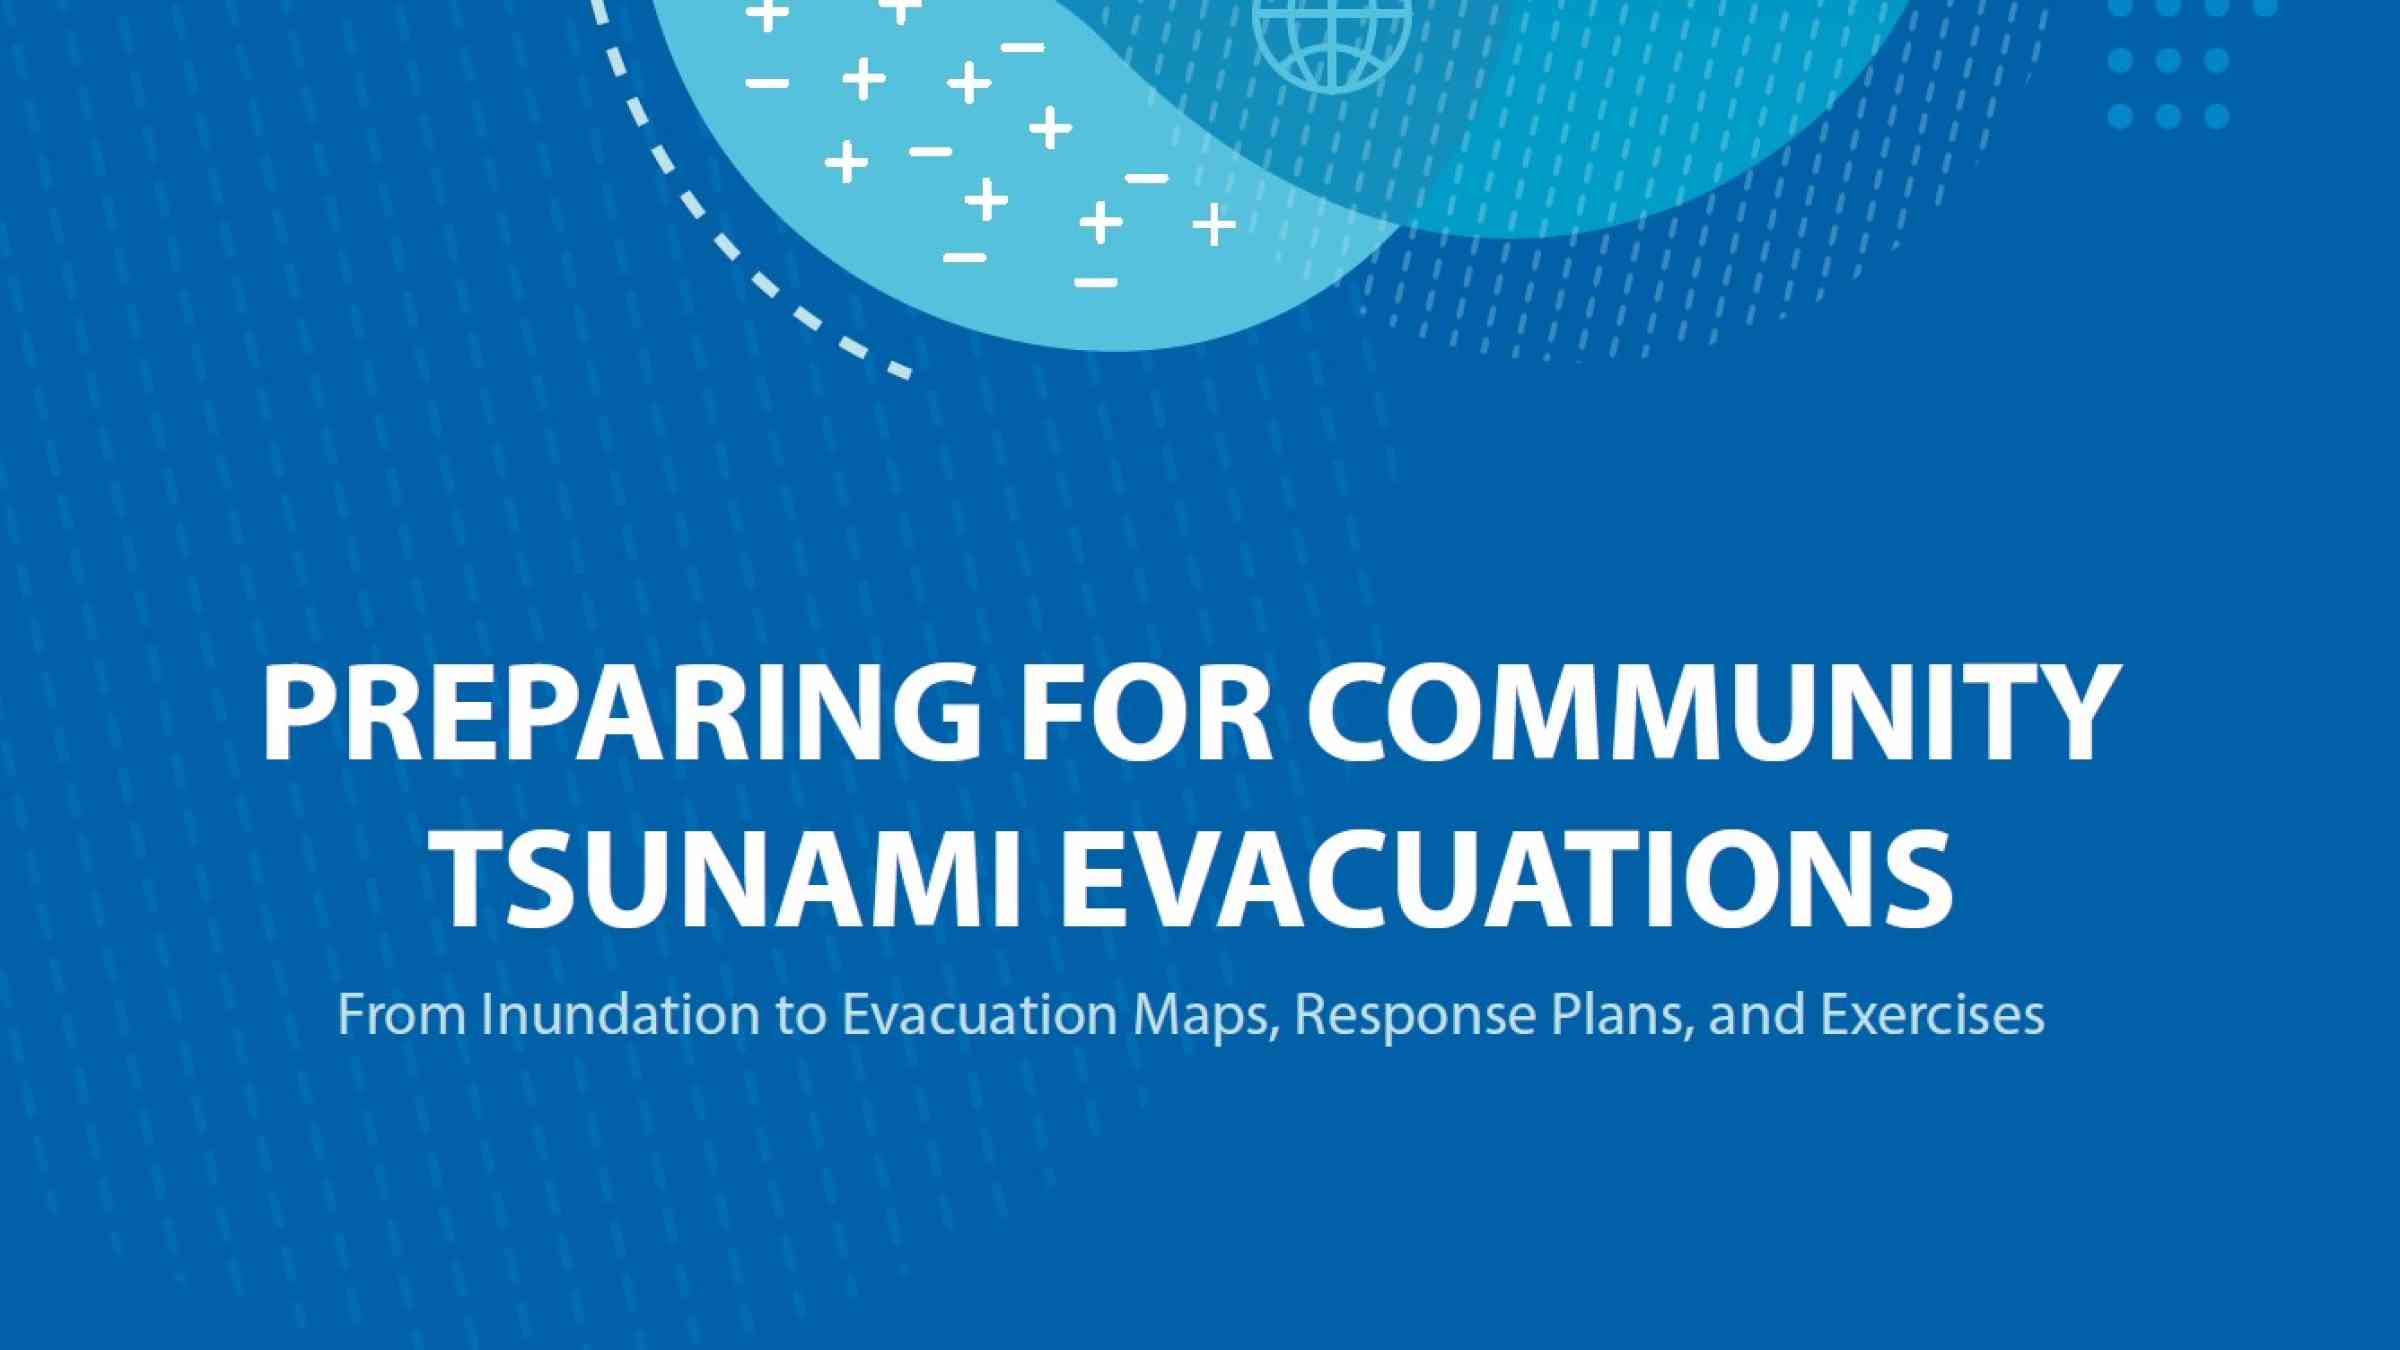 Preparing for community tsunami evacuations: from inundation to evacuation maps, response plans and exercises